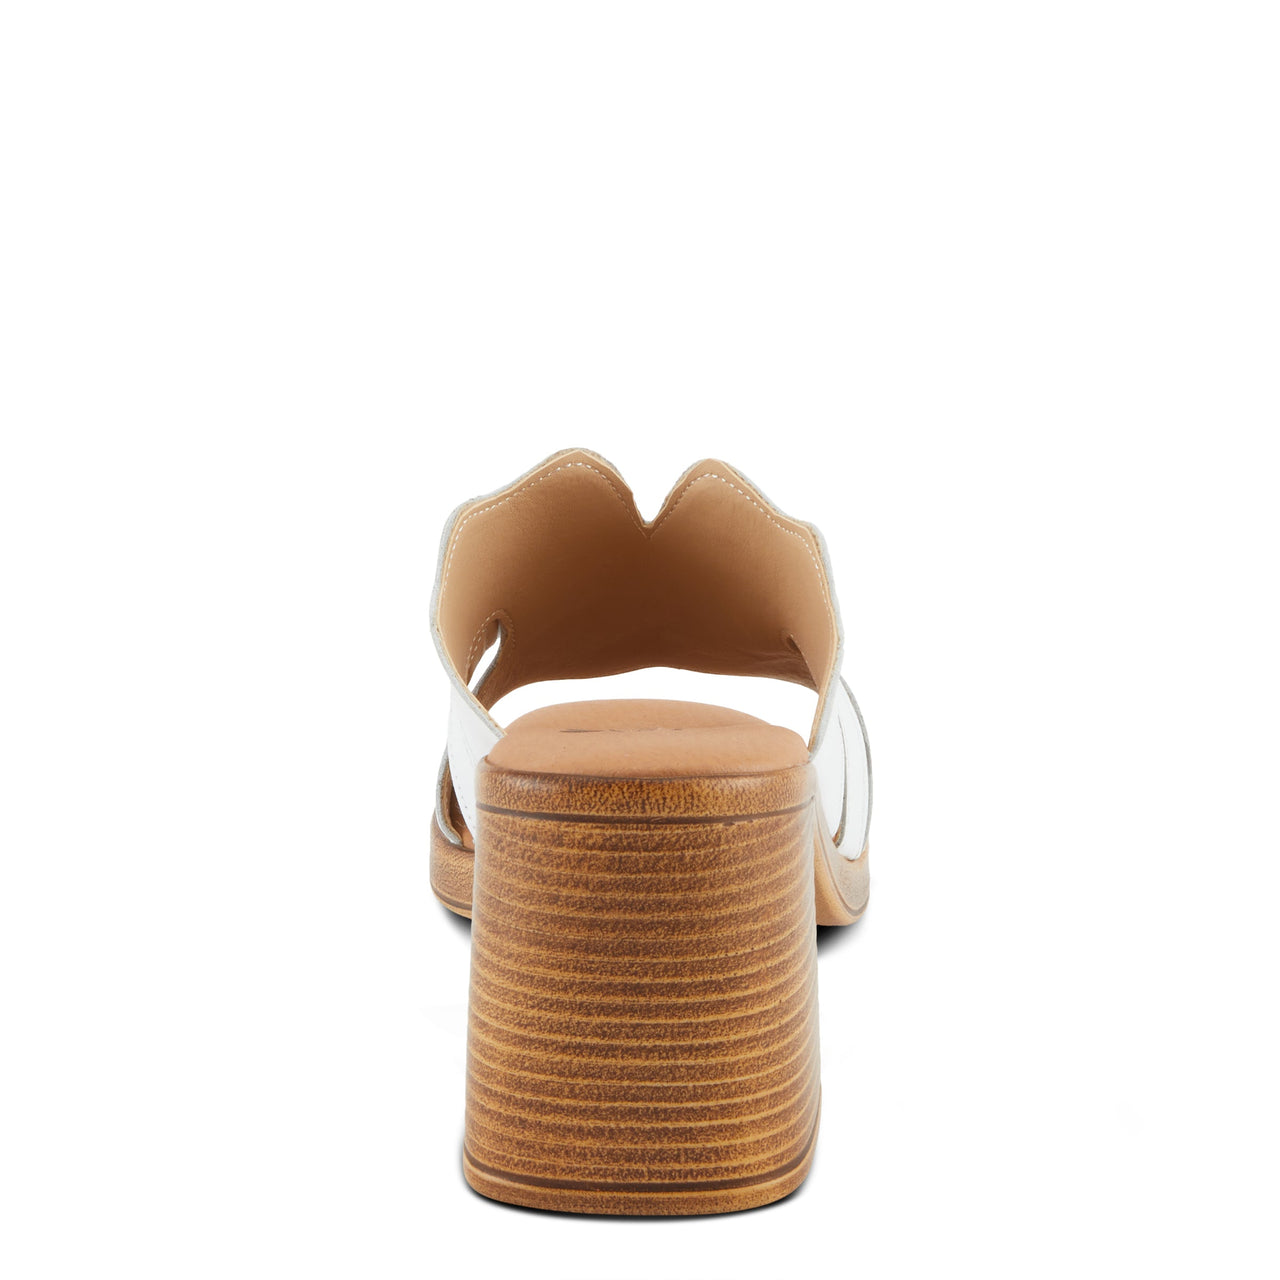  Classic Spring Step Modica Sandals in cognac leather with crisscross straps